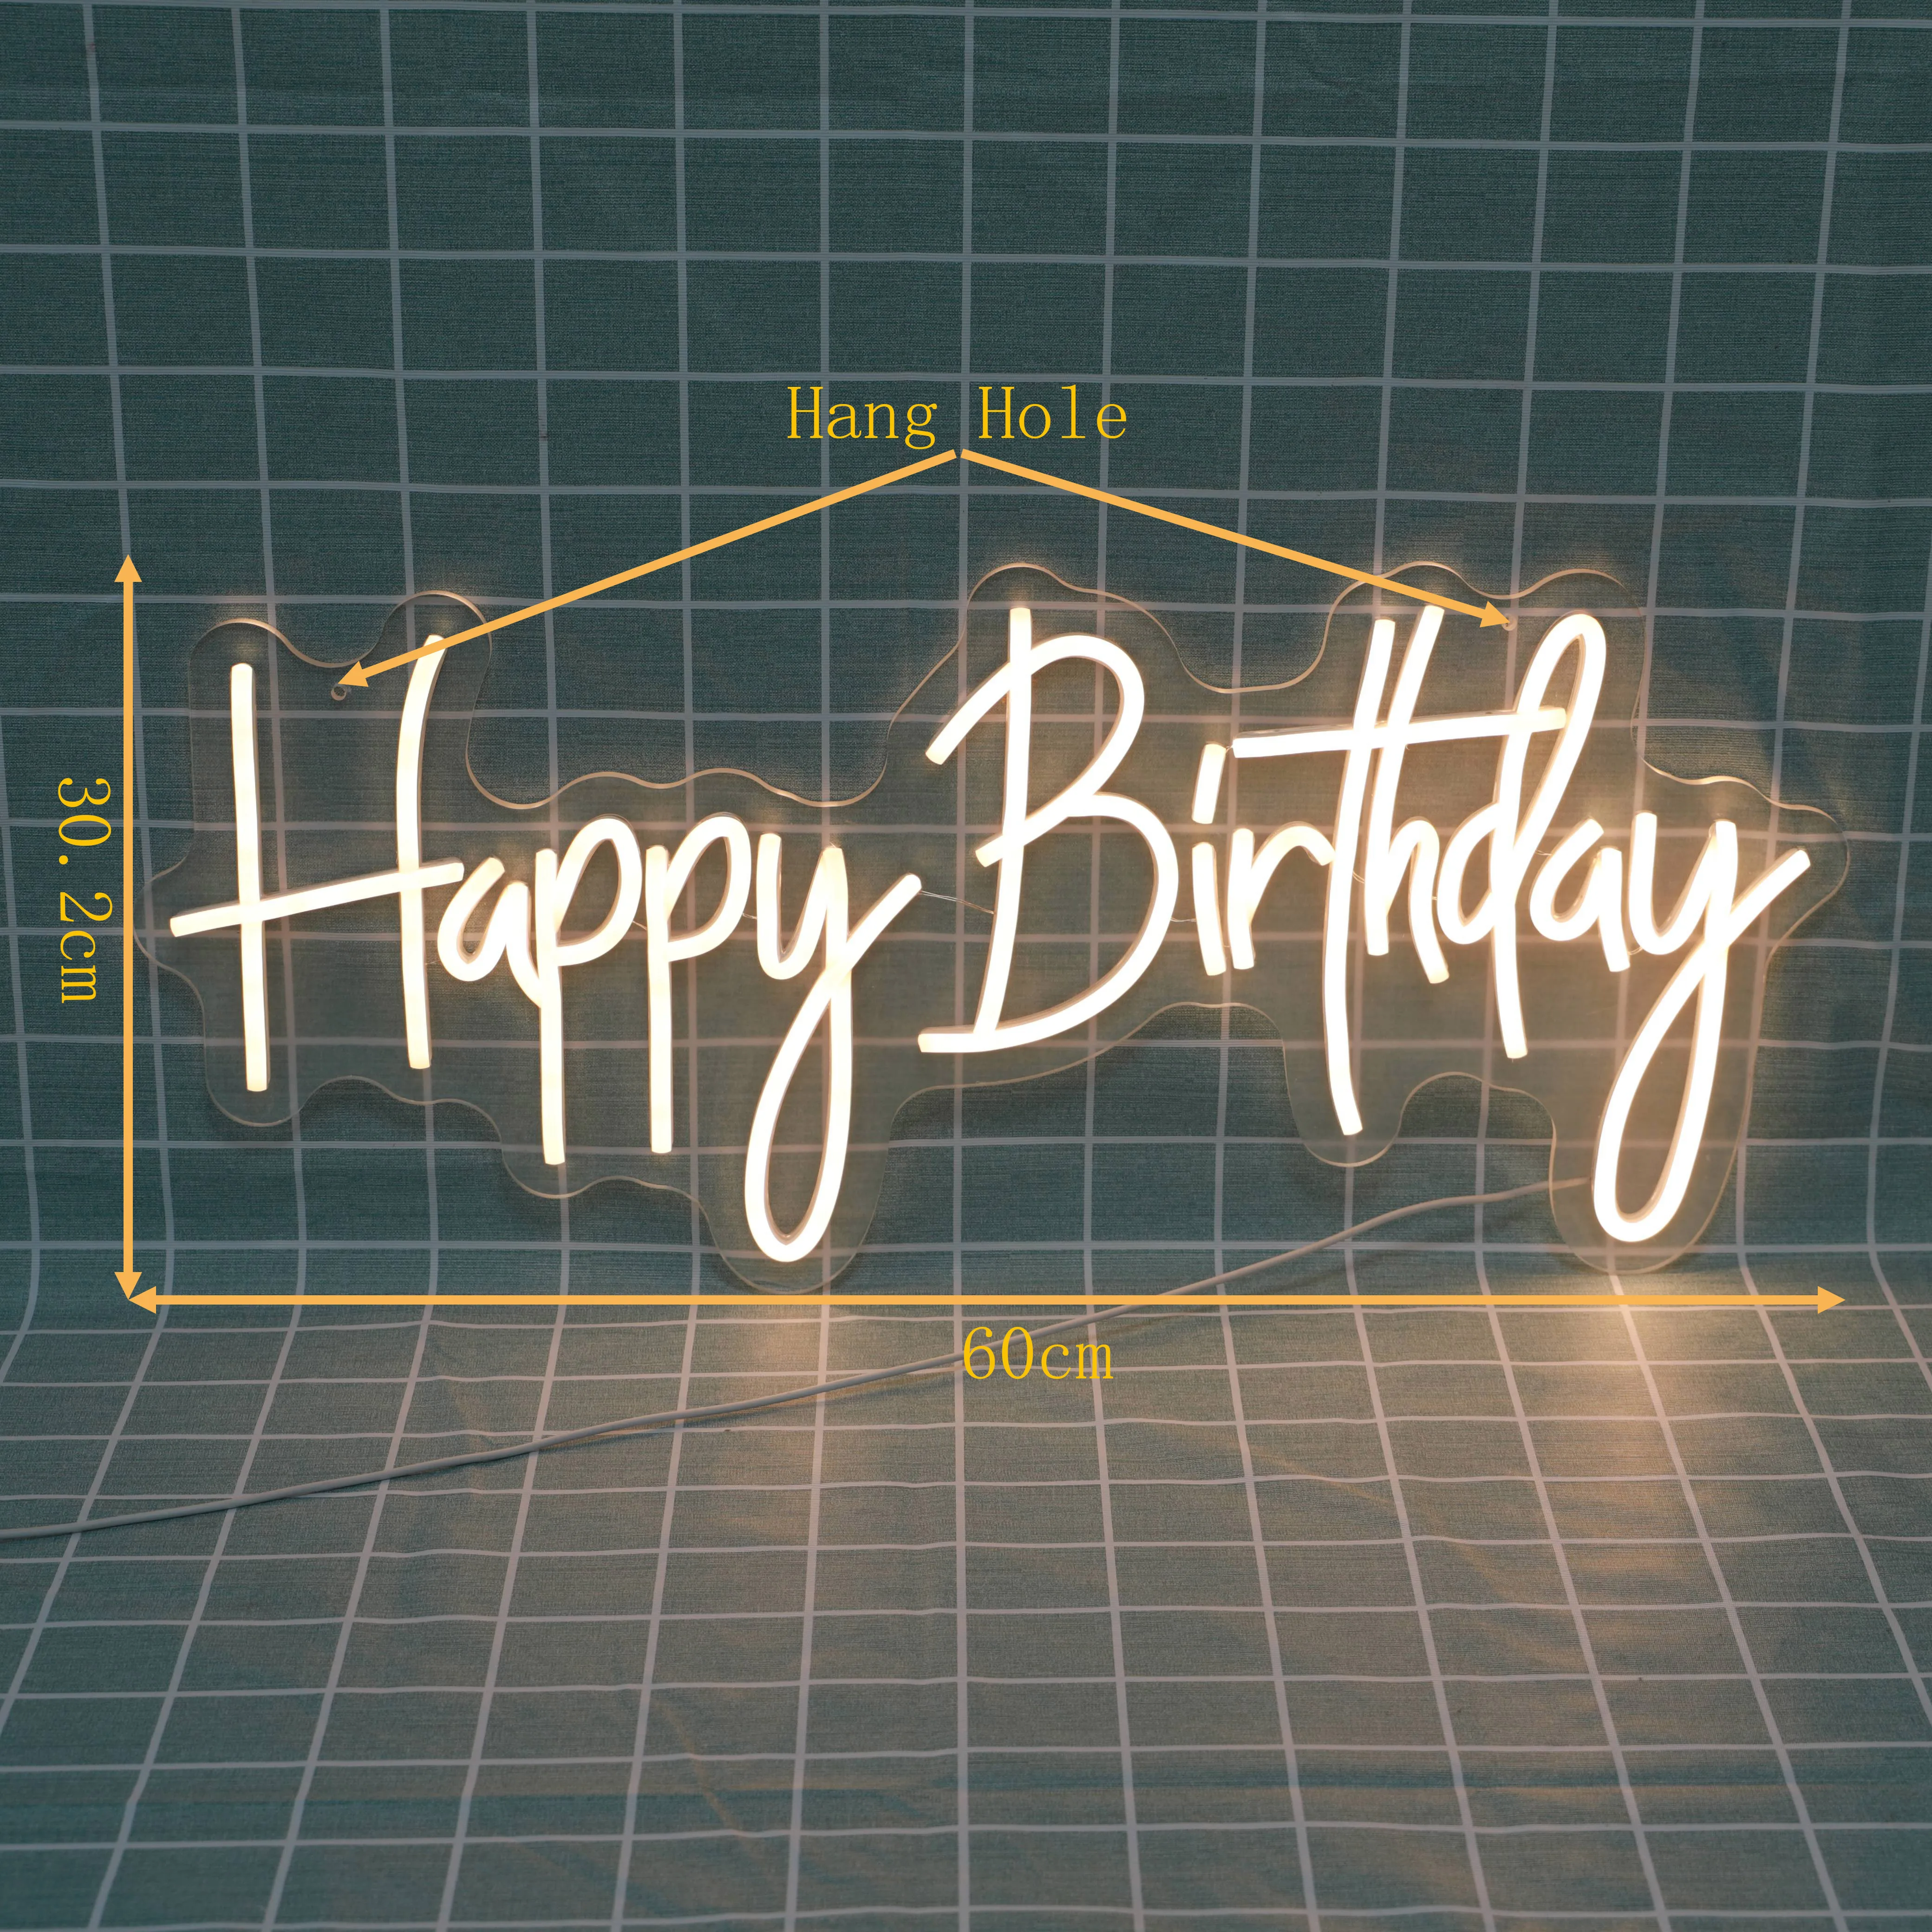 Happy Birthday Neon Sign Design Led Neon Signs Light for Room Pub Club Home Restaurant Wall Hanging Neon Lights